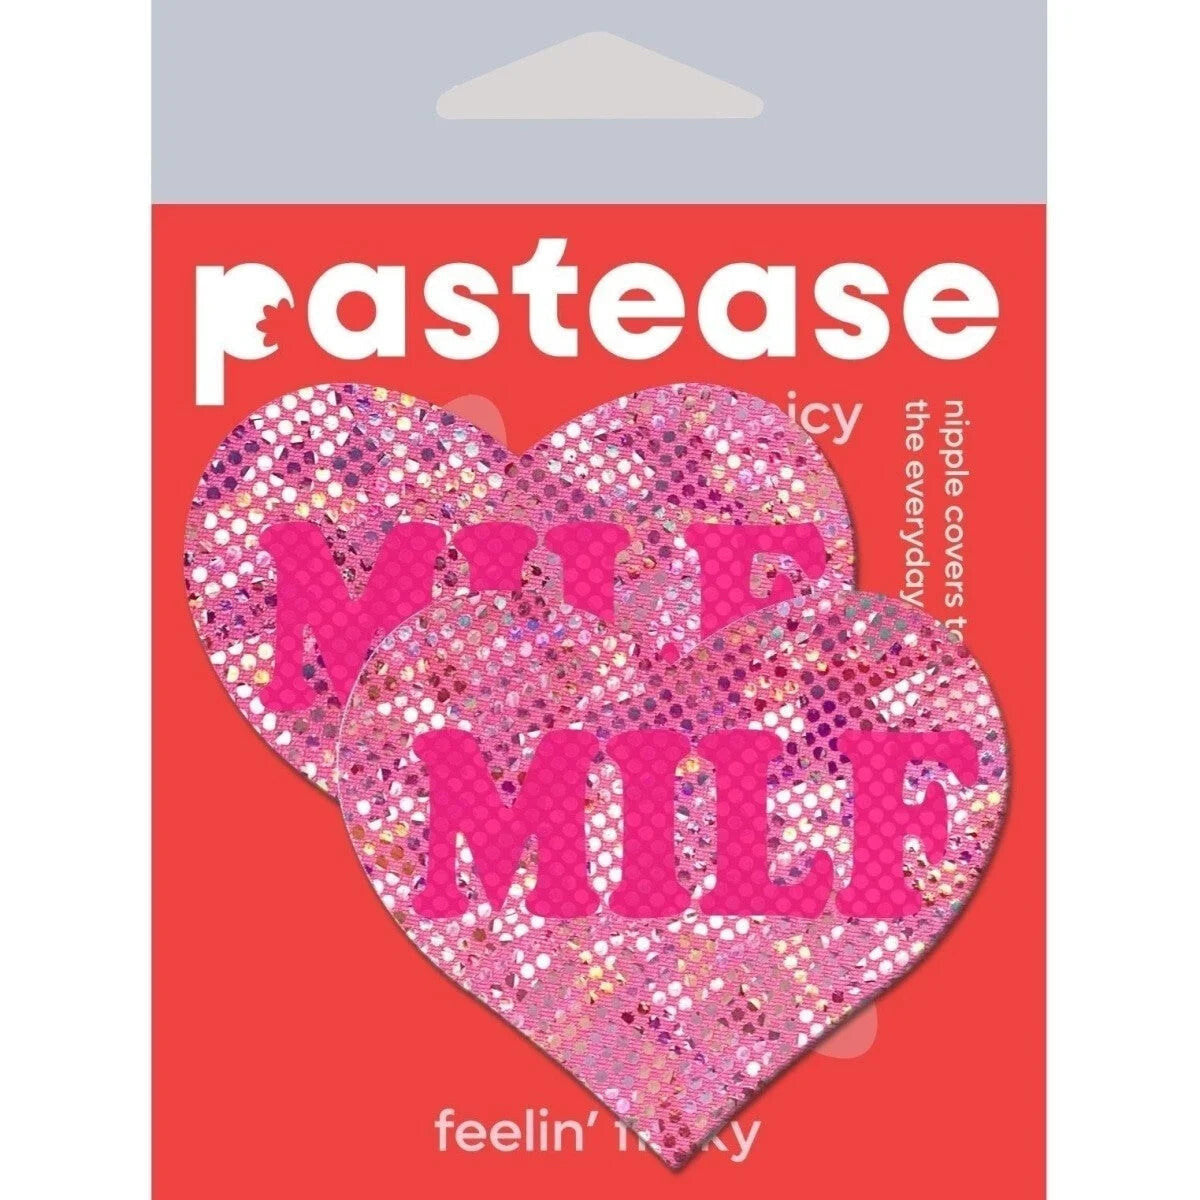 Pastease Love Milf Neon Pink Disco Heart Intimates Adult Boutique